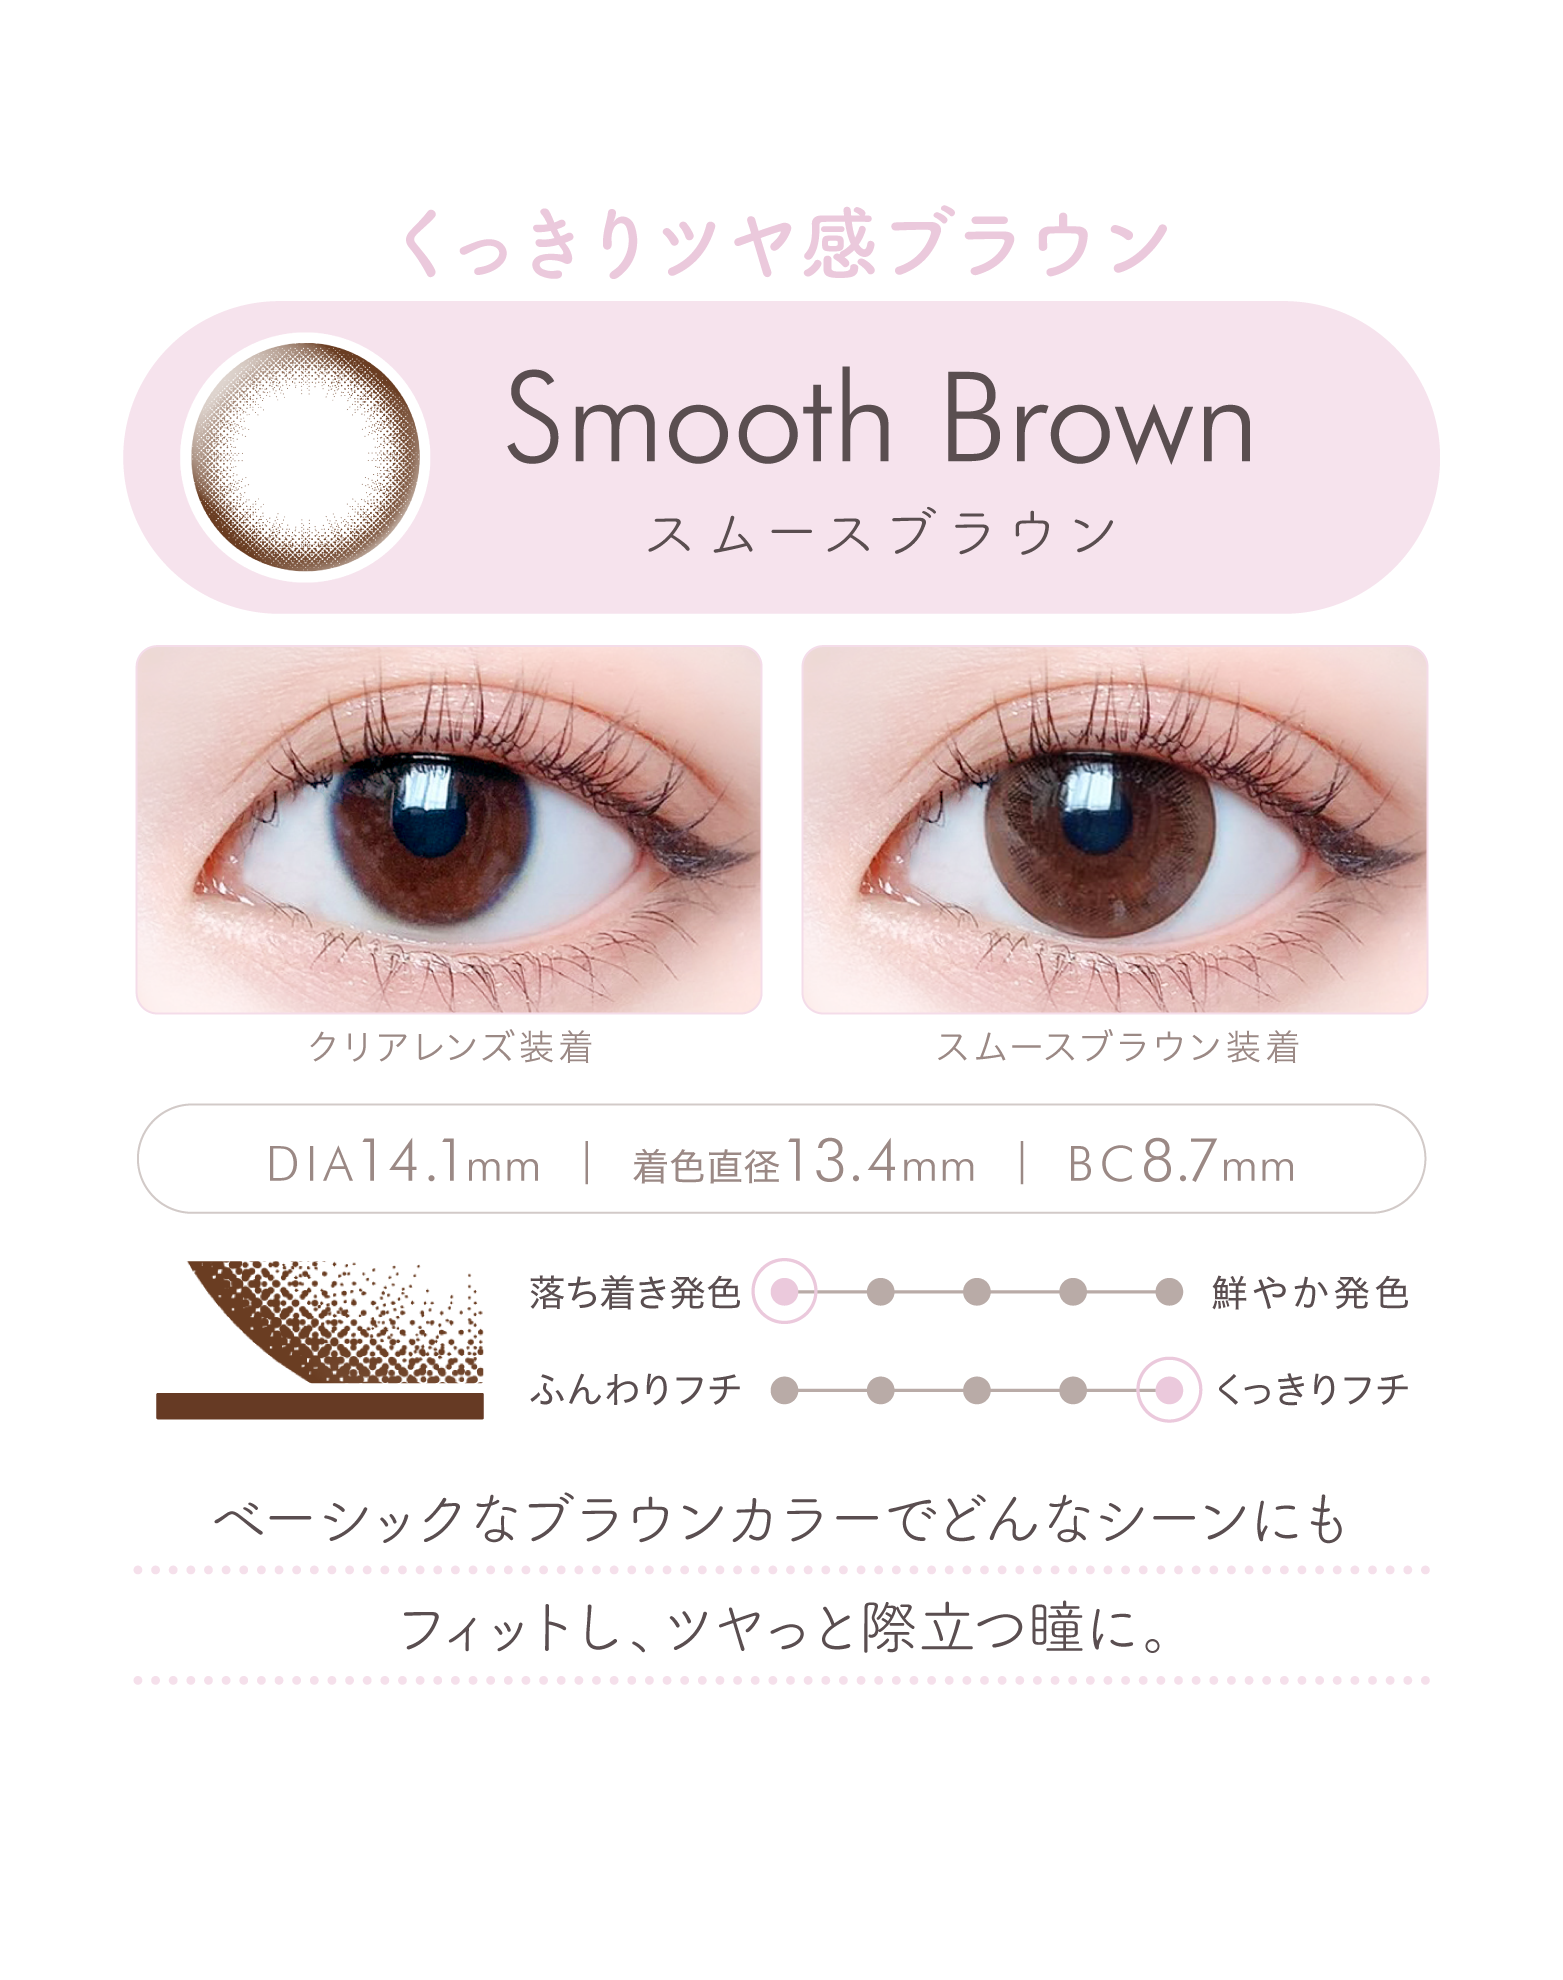 Smooth Brown